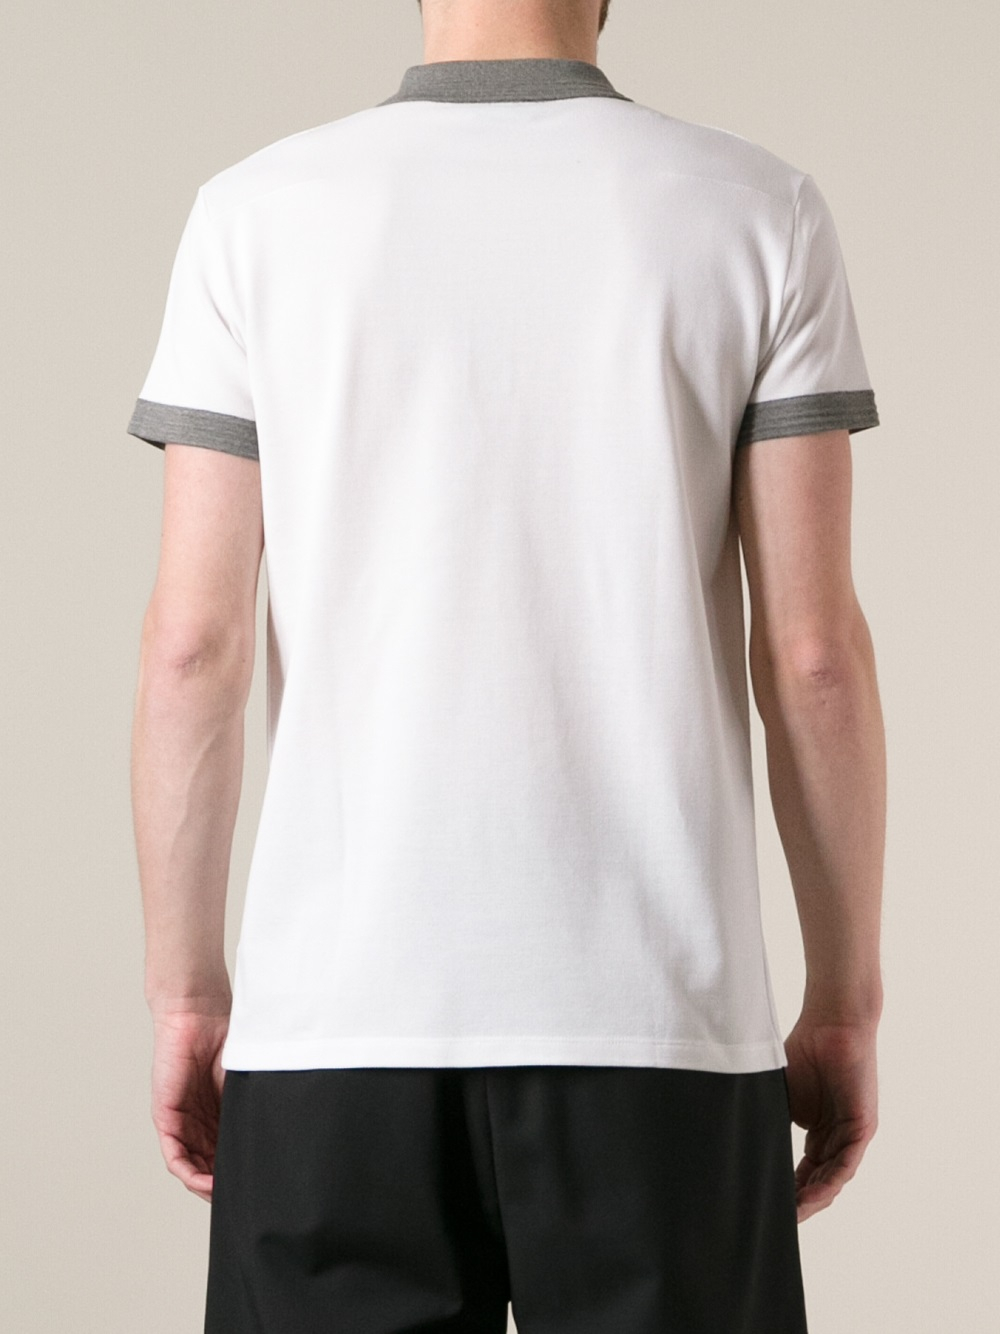 Lyst - Dior Homme Contrast Collar Polo Shirt in White for Men